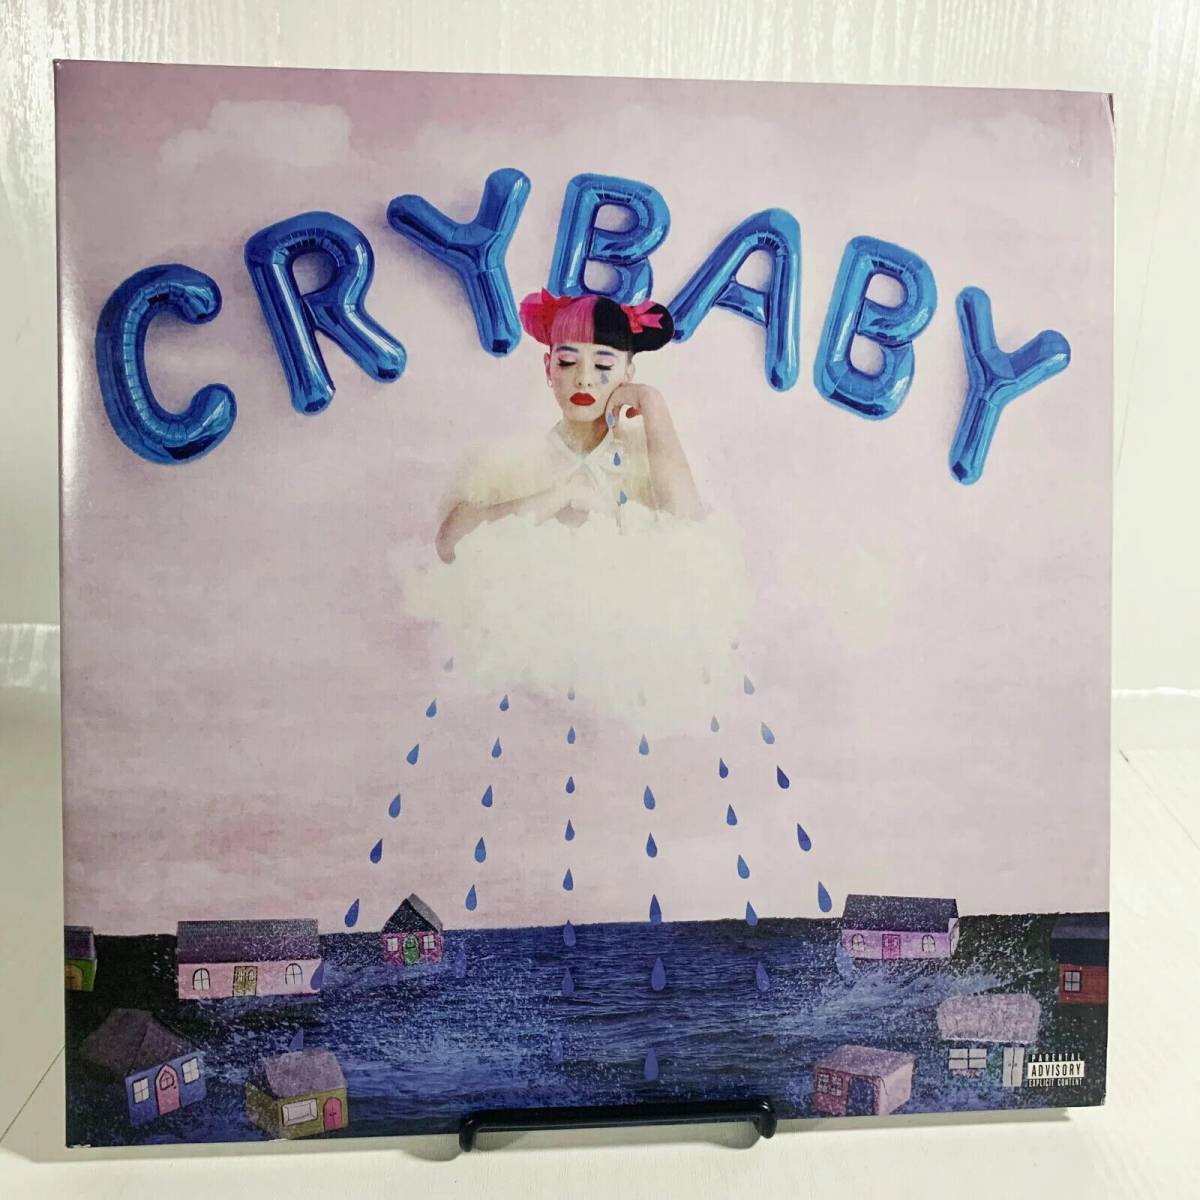 Crybaby #10